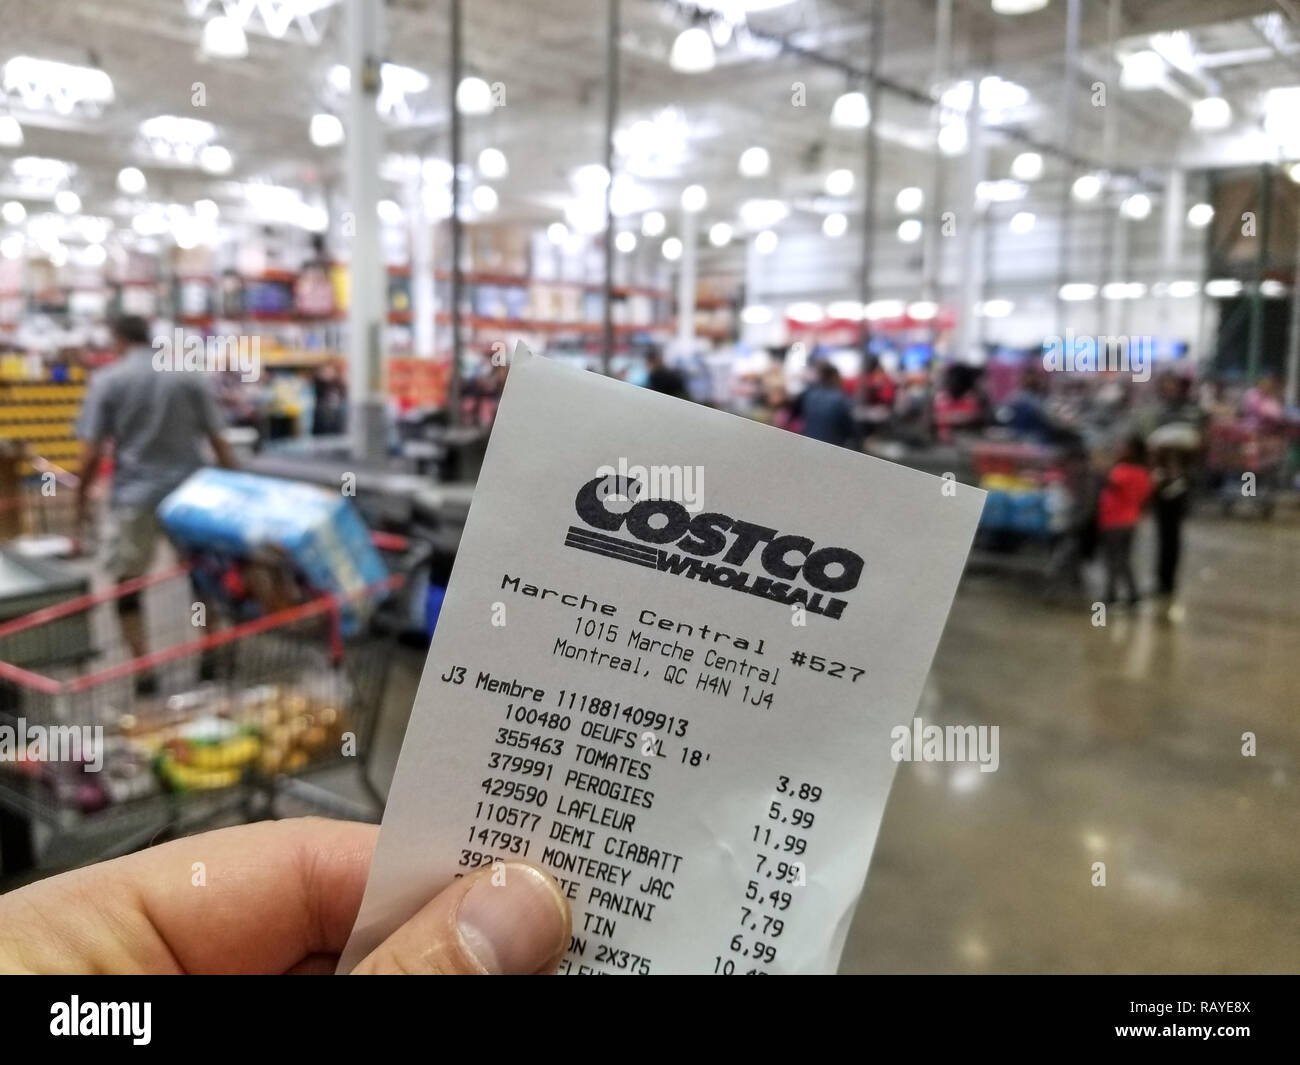 MONTREAL, CANADA - OCTOBER 5, 2018: A hand holding a receipt with the brand name and logo in Costco warehouse. Costco is an American corporation which Stock Photo